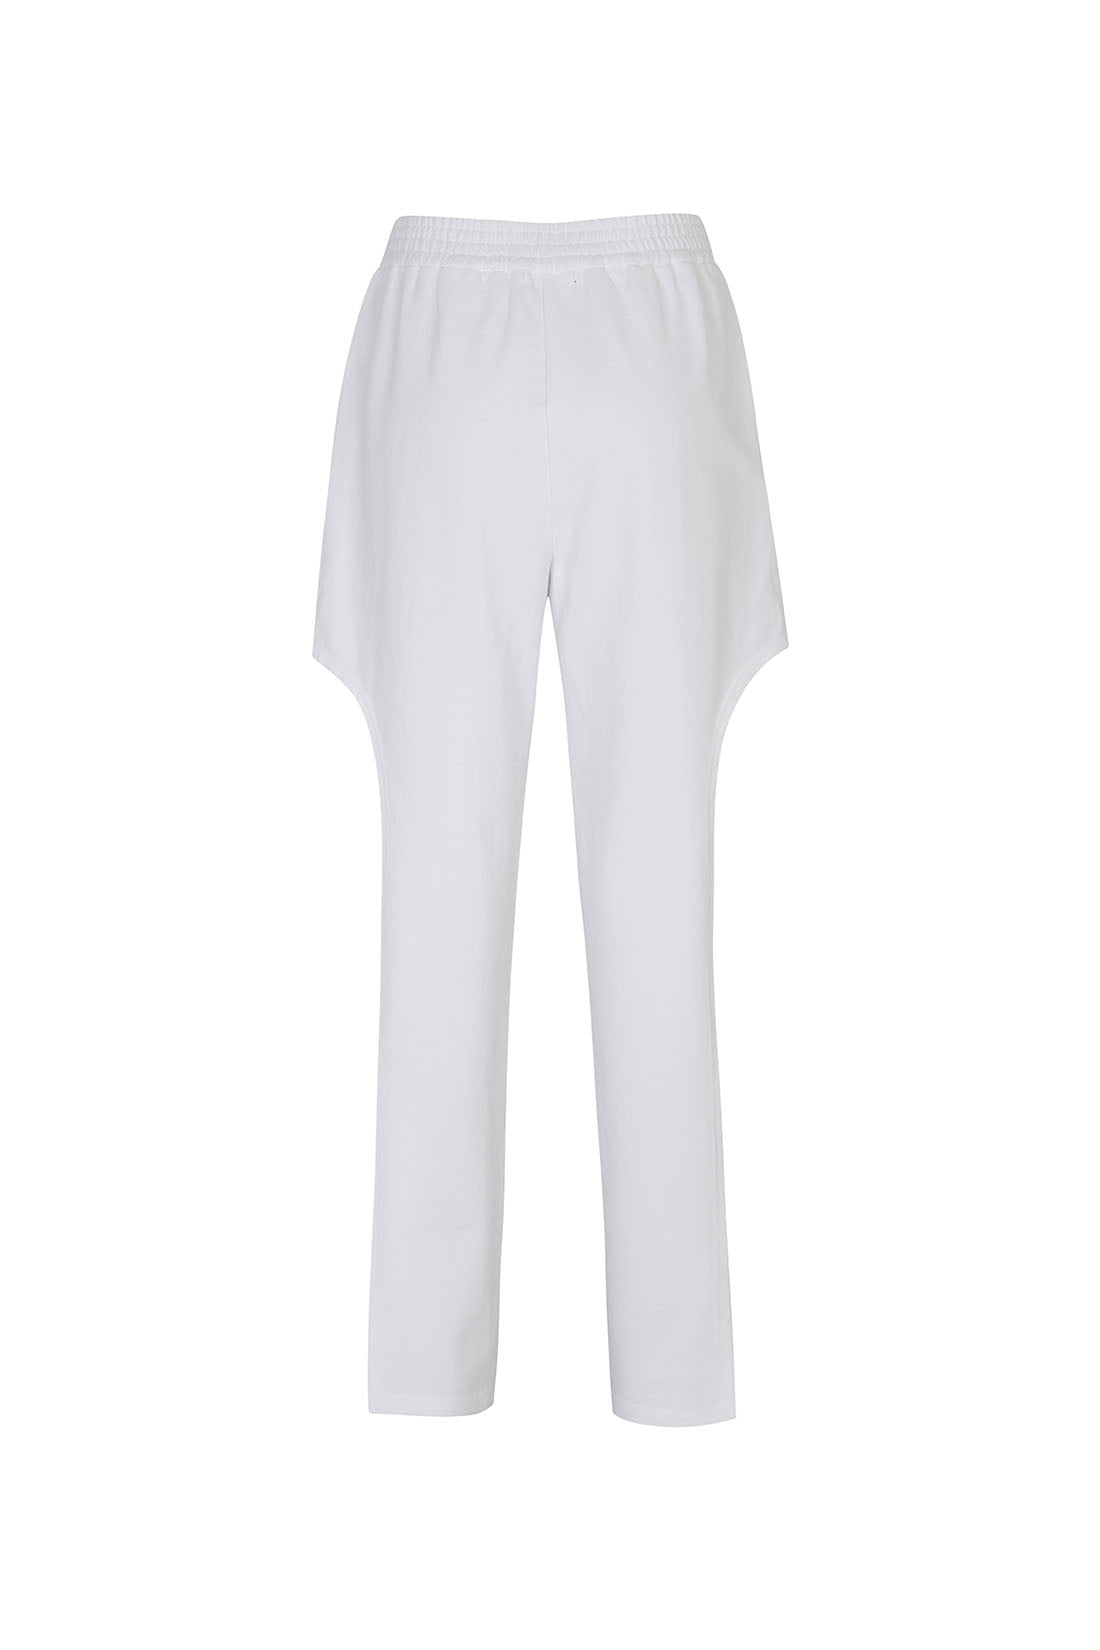 [MADE] BOTH SIDE CUT-OUT JERSEY PANTS WHITE